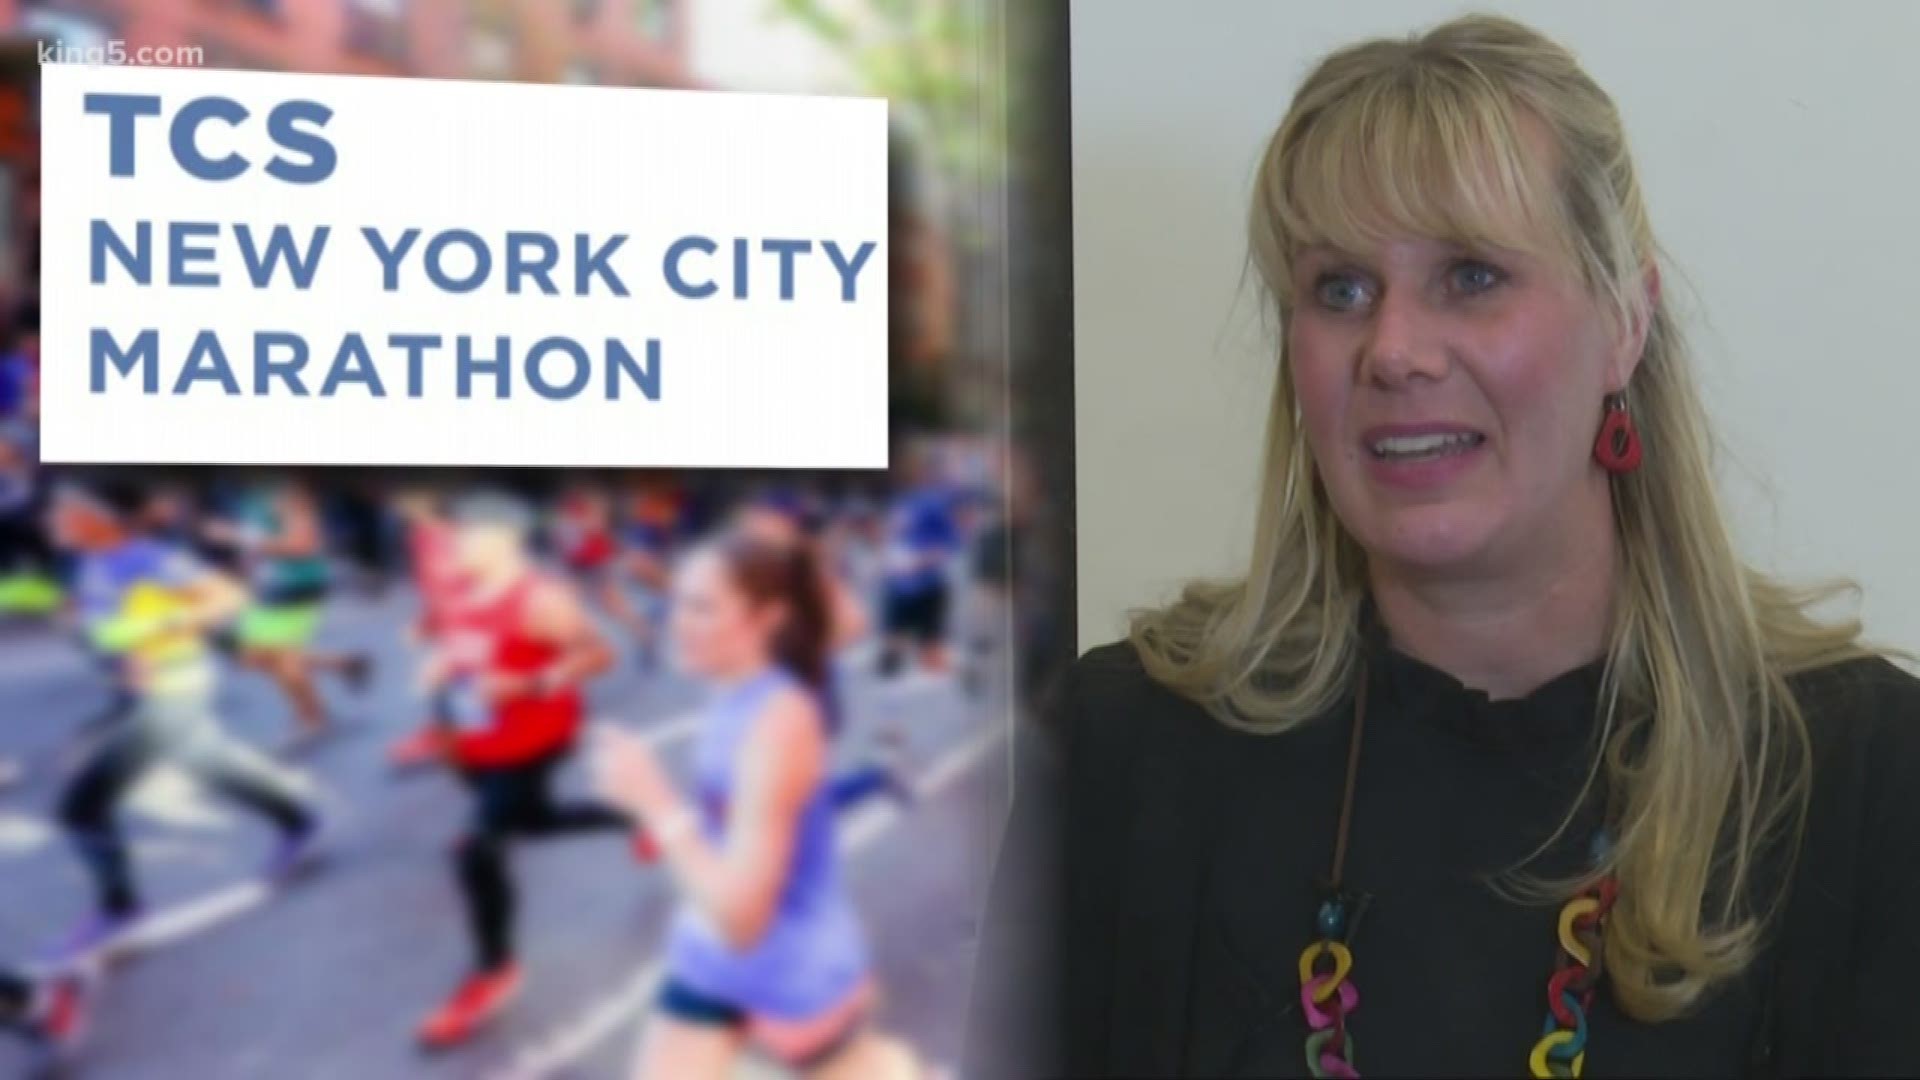 If running 26.2 miles wasn't enough, this Bonney Lake High School biology teacher is running it with a defibrillator implanted in her chest. She's conquered over a dozen marathons and has her sights set on the TCS New York City Marathon later this year. KING 5 Take 5 producer Morgan Brice reports.